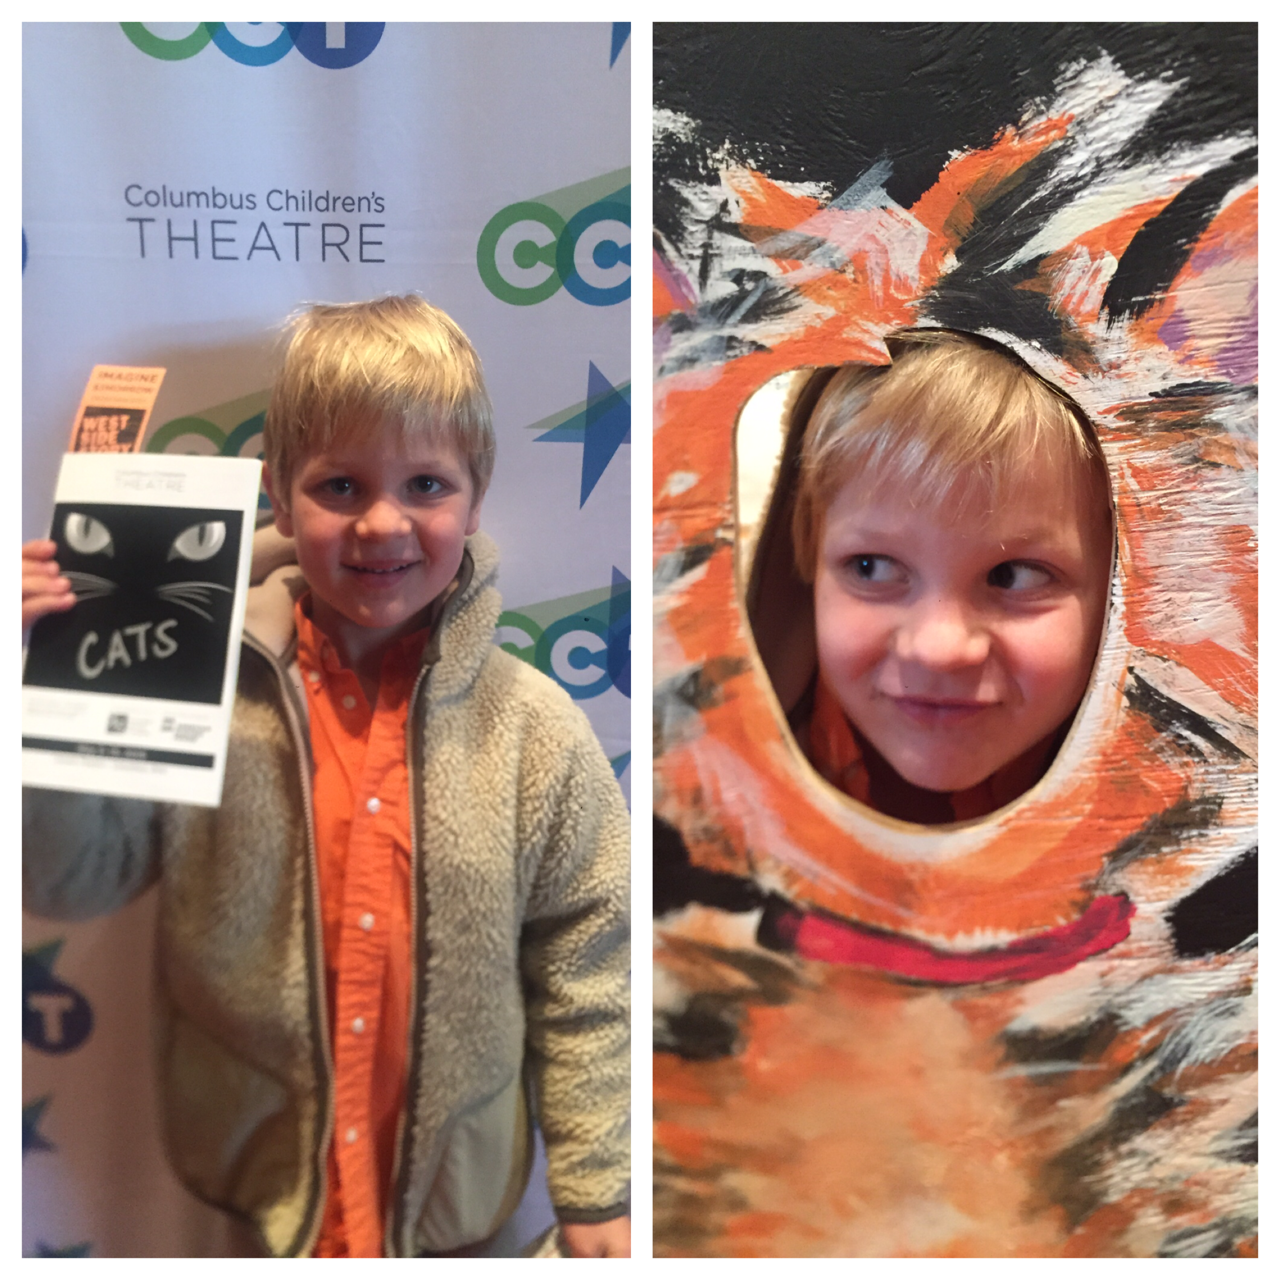 An afternoon at the theatre date w Mommy. Oh well, I guess there never, ever was there a Cat so clever a Magical Mr M,…
Kelly Casto
Asset Manager & Broker | Asset Management
250 Civic Center Dr | Suite 500
Columbus, Ohio 43215
P: (614) 744-3286
F:...